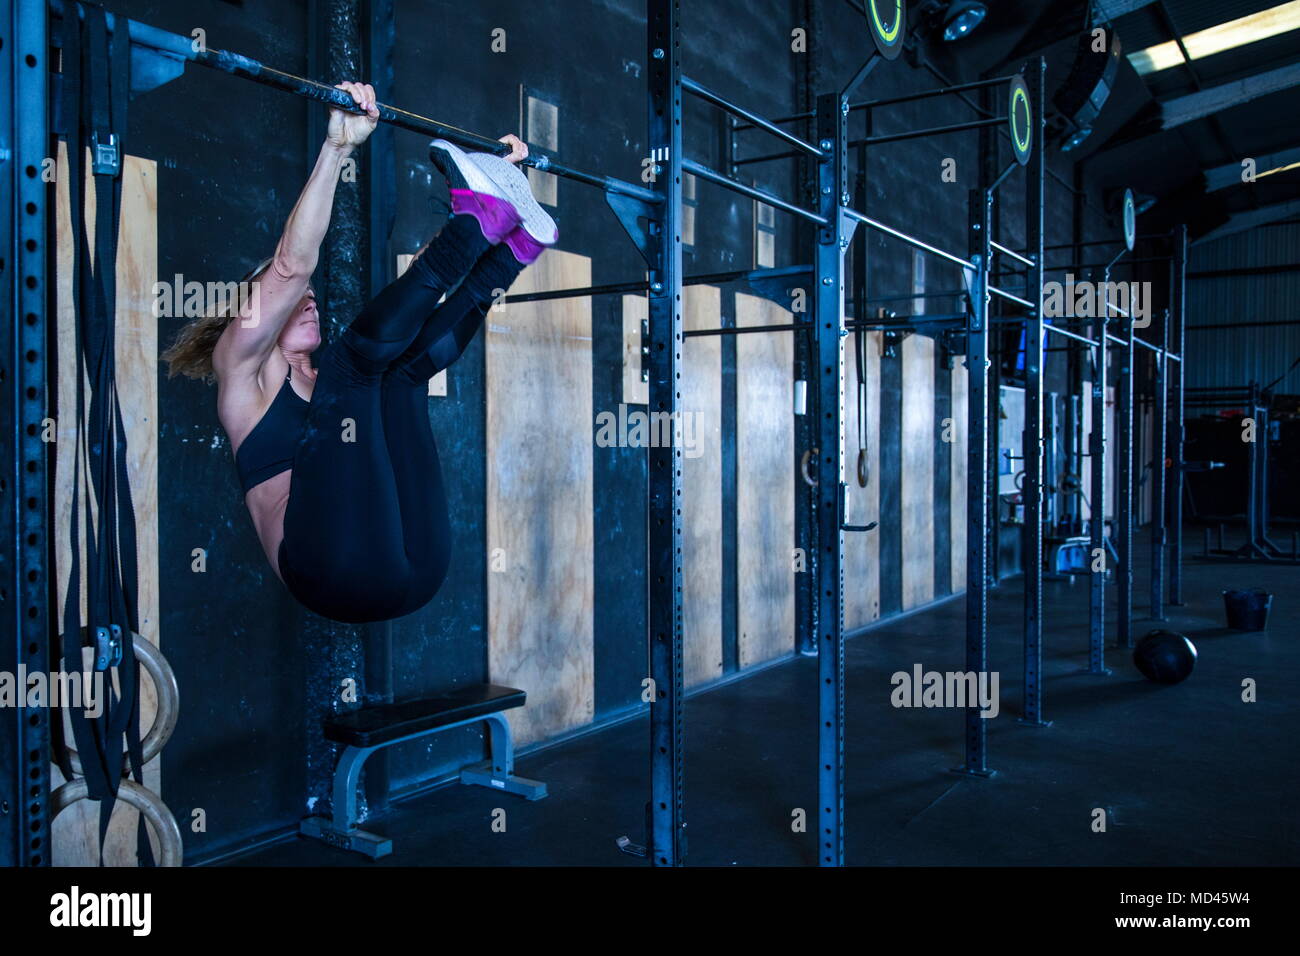 Woman exercising in gymnasium, using pull up bars Stock Photo